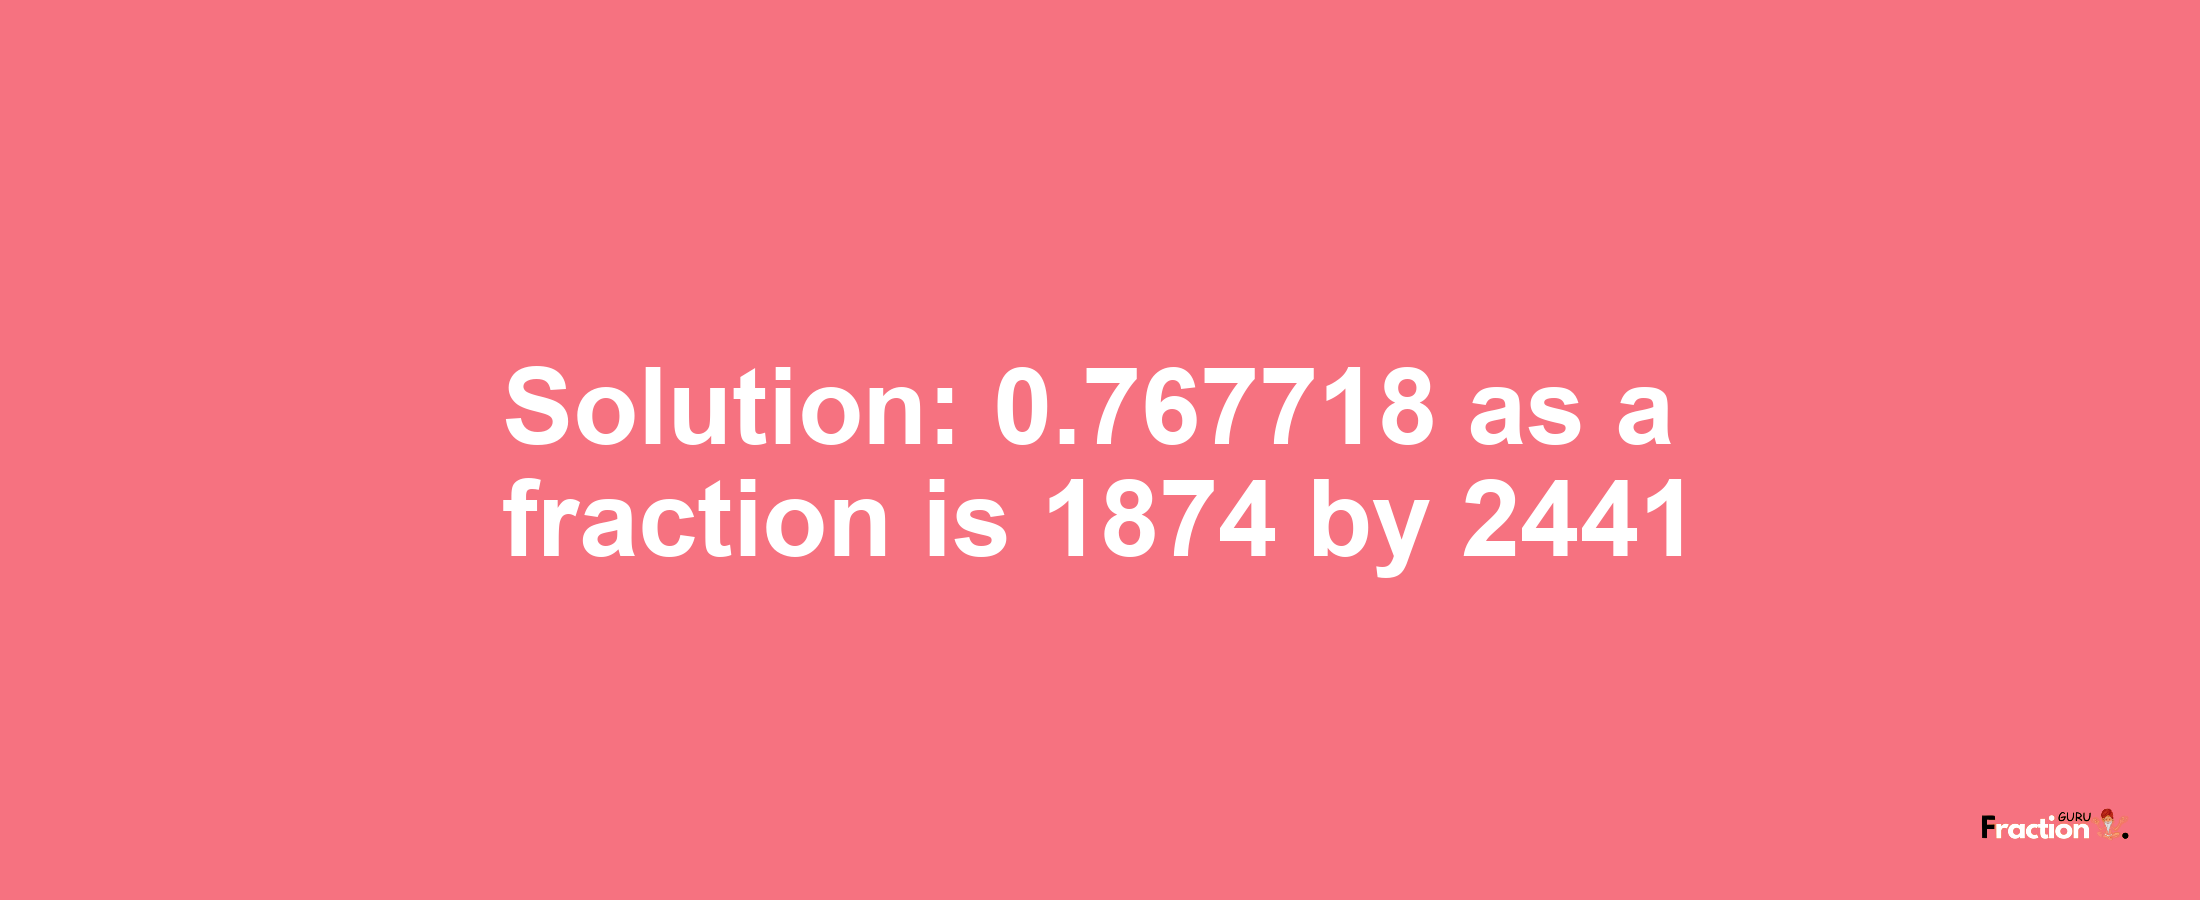 Solution:0.767718 as a fraction is 1874/2441